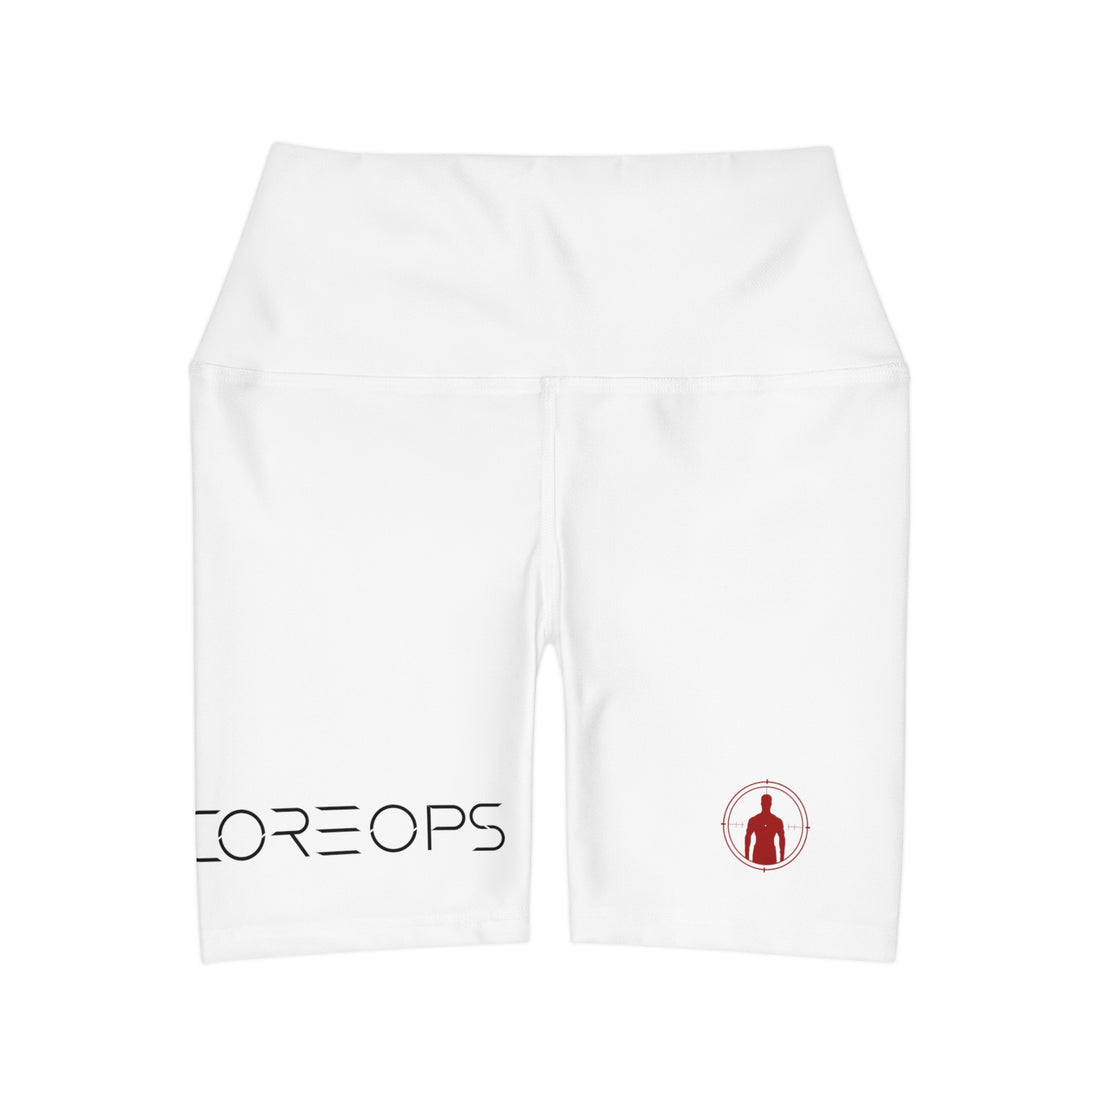 CoreOps High Waisted Shorts